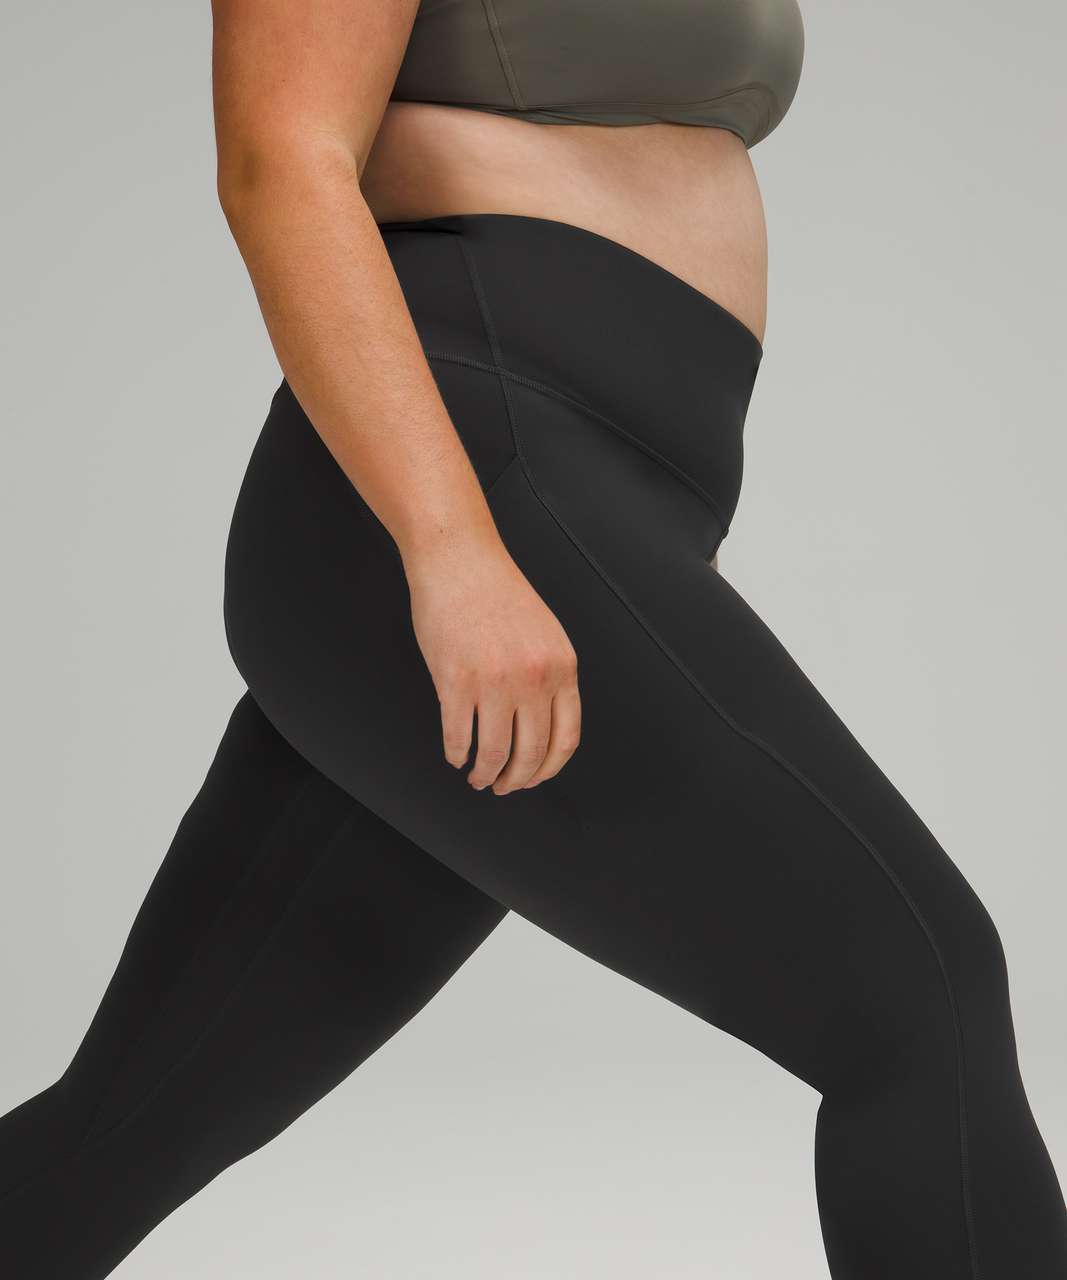 Lululemon Align High Rise Crop with Pockets 23" - Graphite Grey